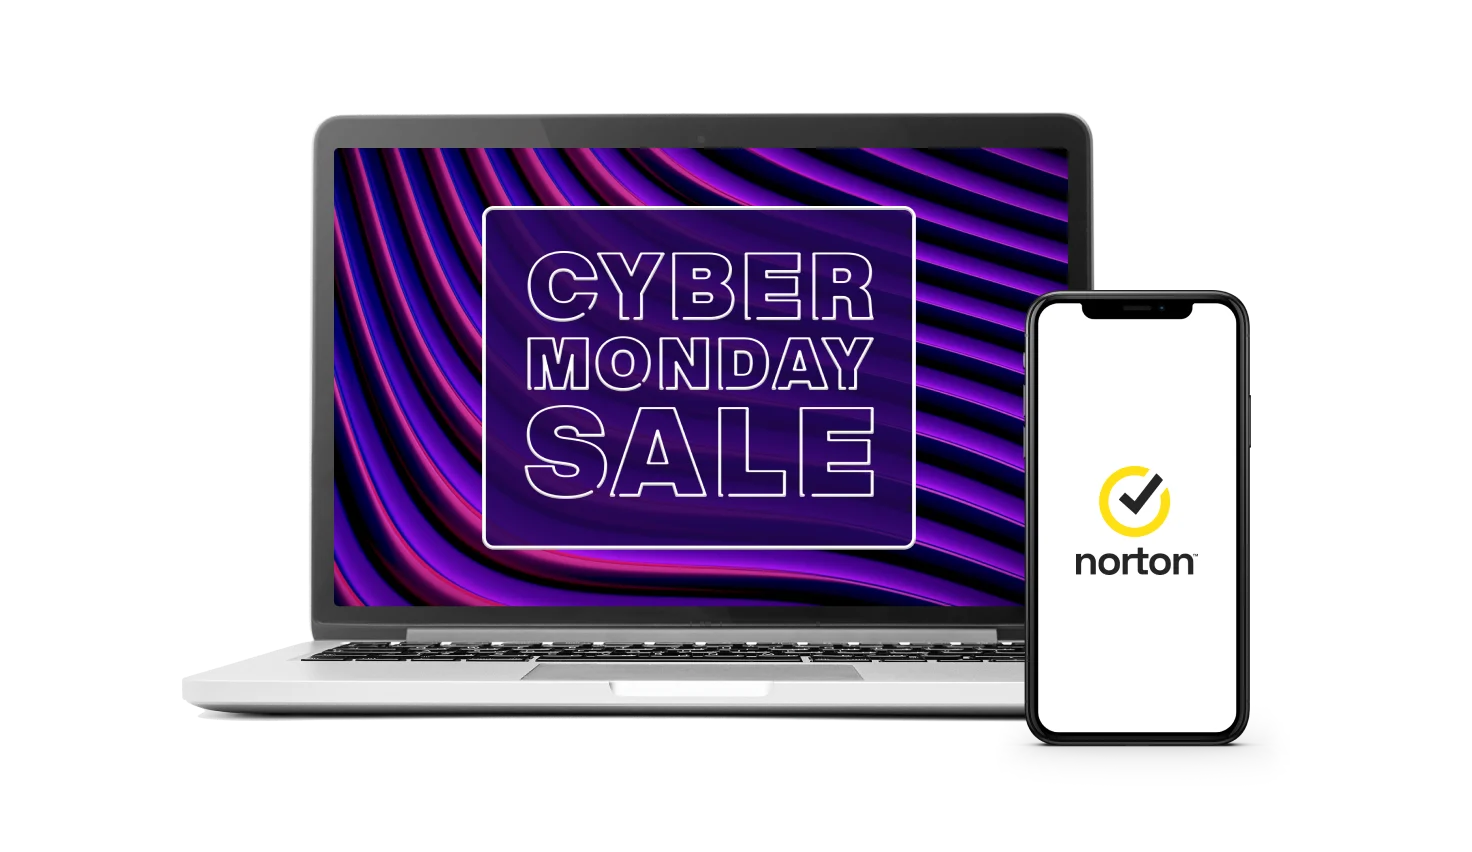 A computer featuring a neon screen reading "Cyber Monday sale" and a phone with the Norton™ logo.